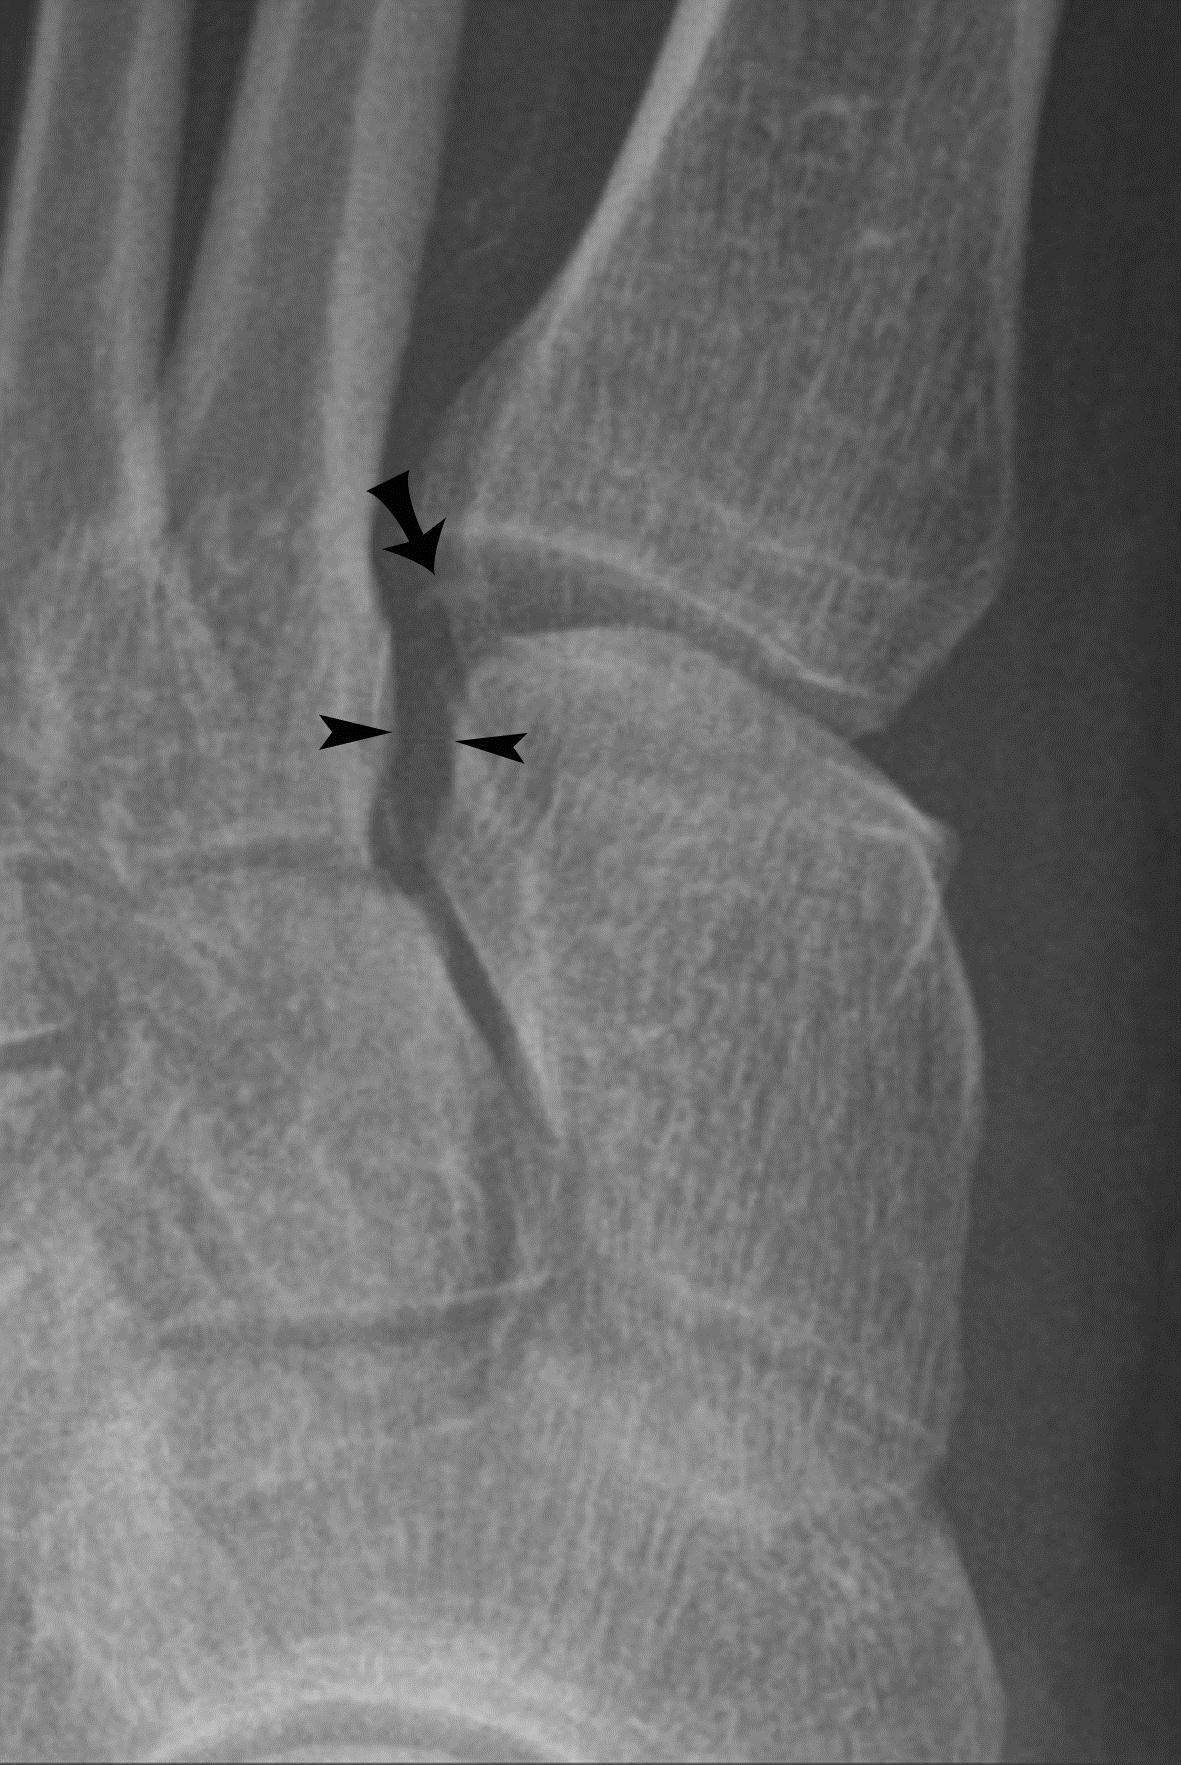 Figure 4. Acute Charcot’s neuroarthropathy. There is widening of the interosseous distance between the medial cuneiform and 2nd metatarsal (arrowheads), indicating disruption of the Lis-Franc ligament and a subtle flake fracture fragment (arrow).